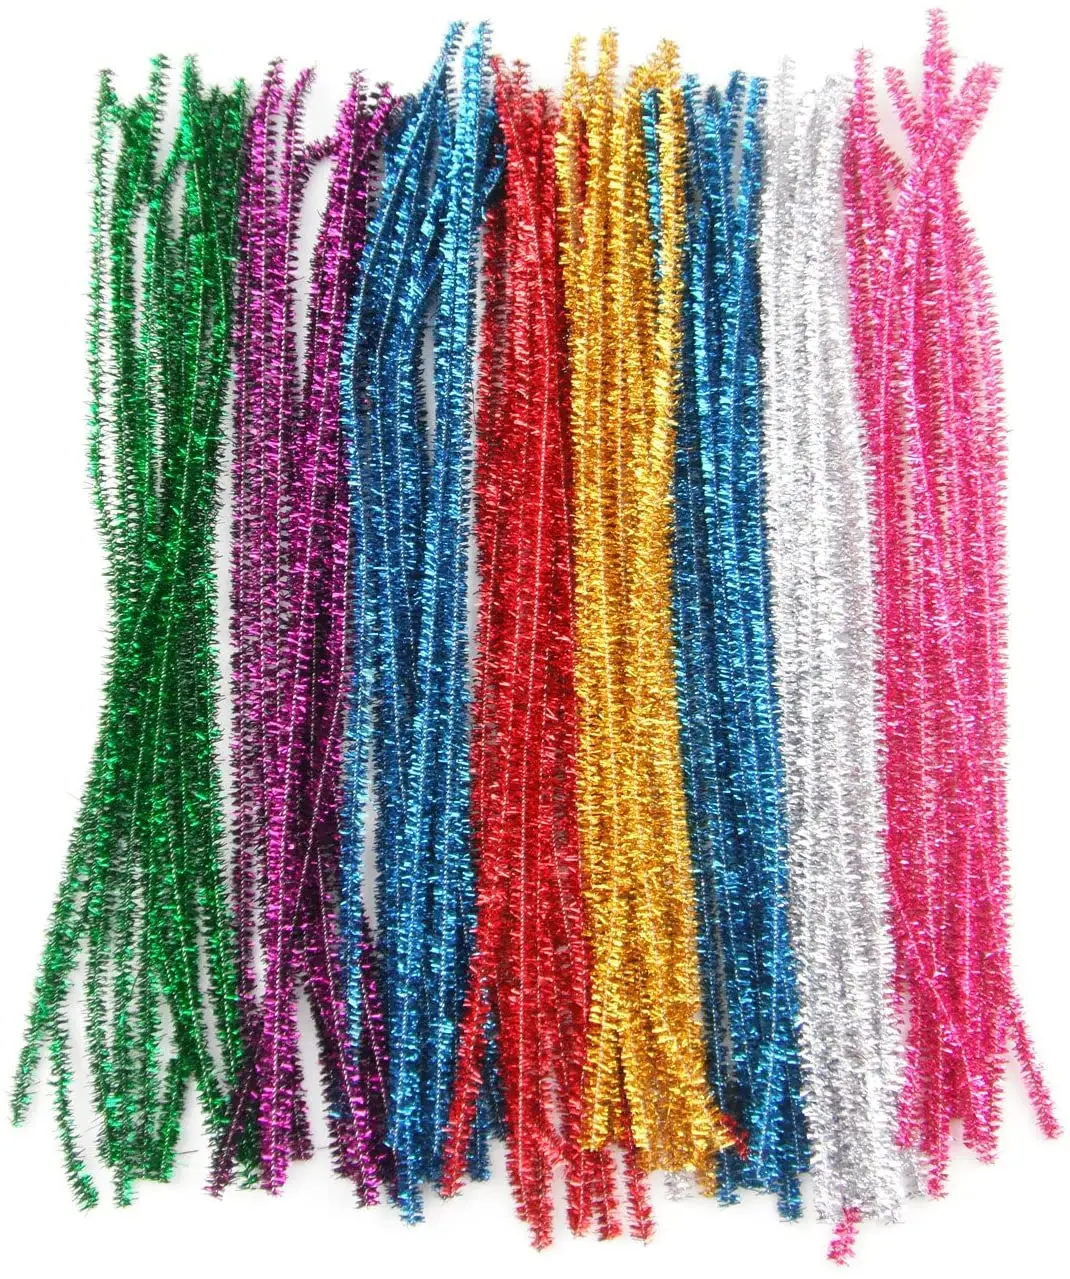 100Pcs Glitter Pipe Cleaners,Chenille Stems Metallic Sparkle Craft Pipe  Cleaner for DIY Art and Crafts Creative Projects